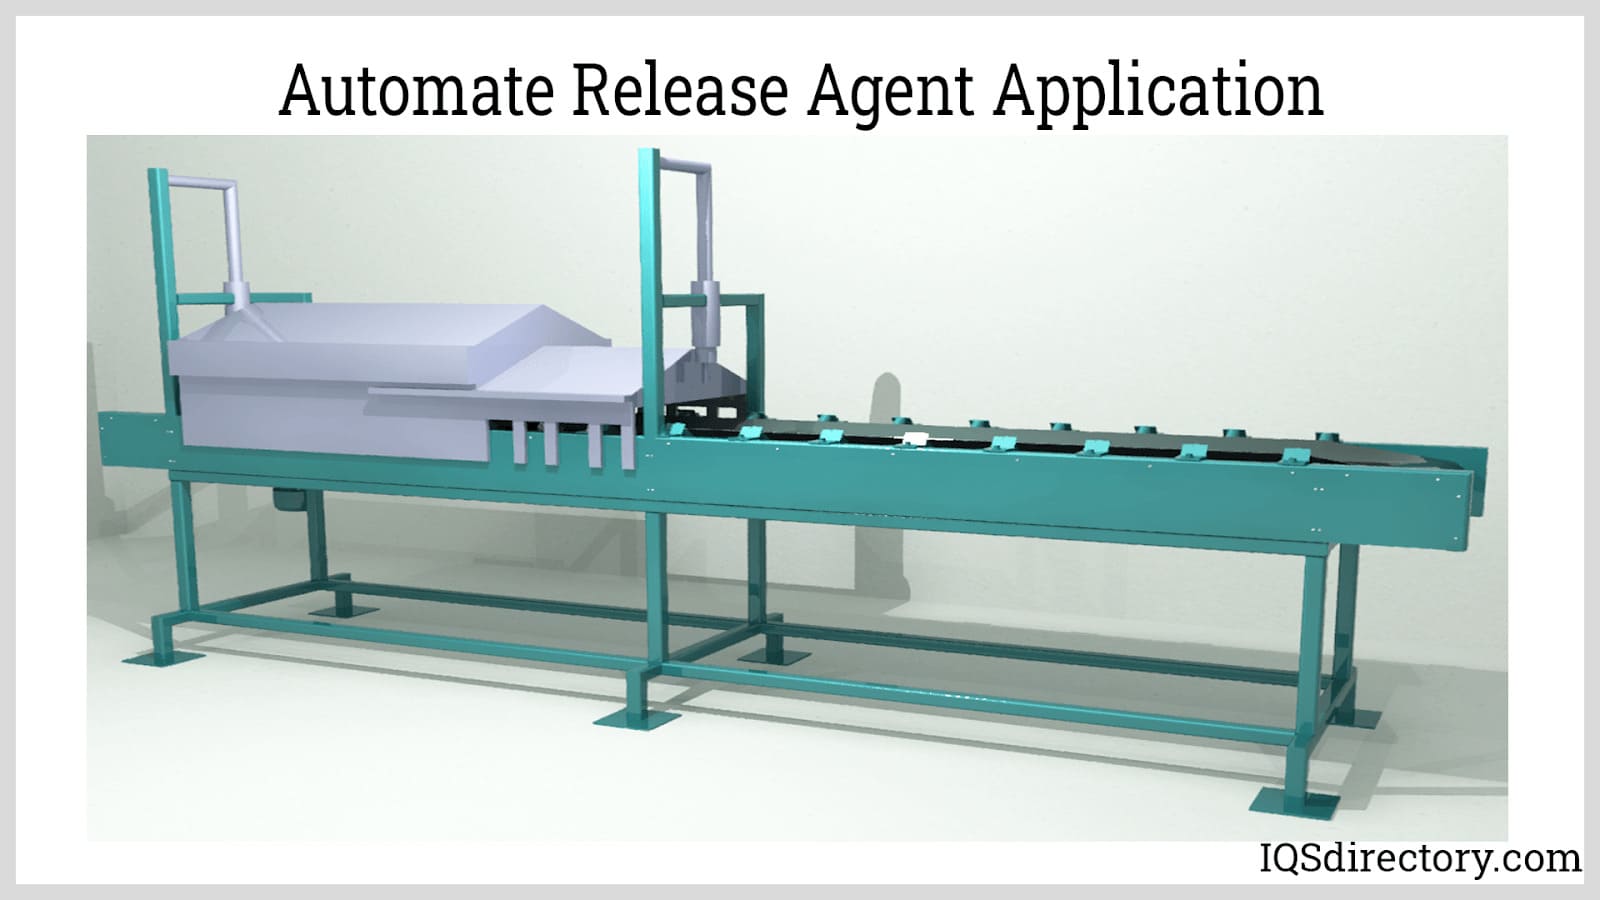 Automate Release Agent Application